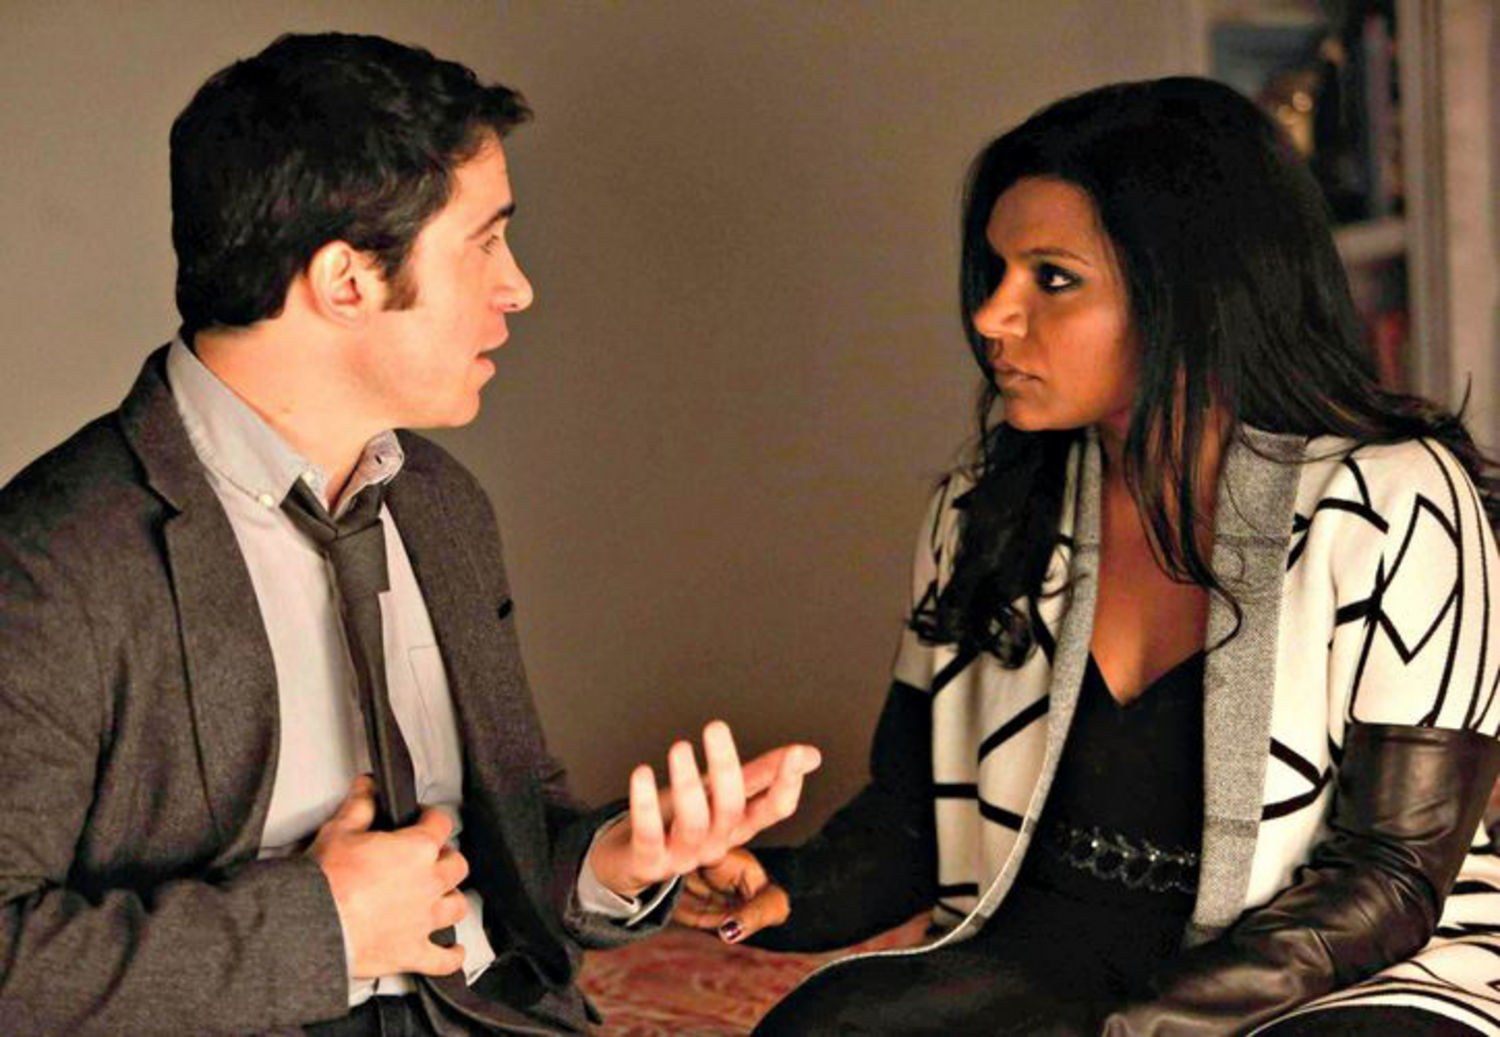 The Mindy Project #5